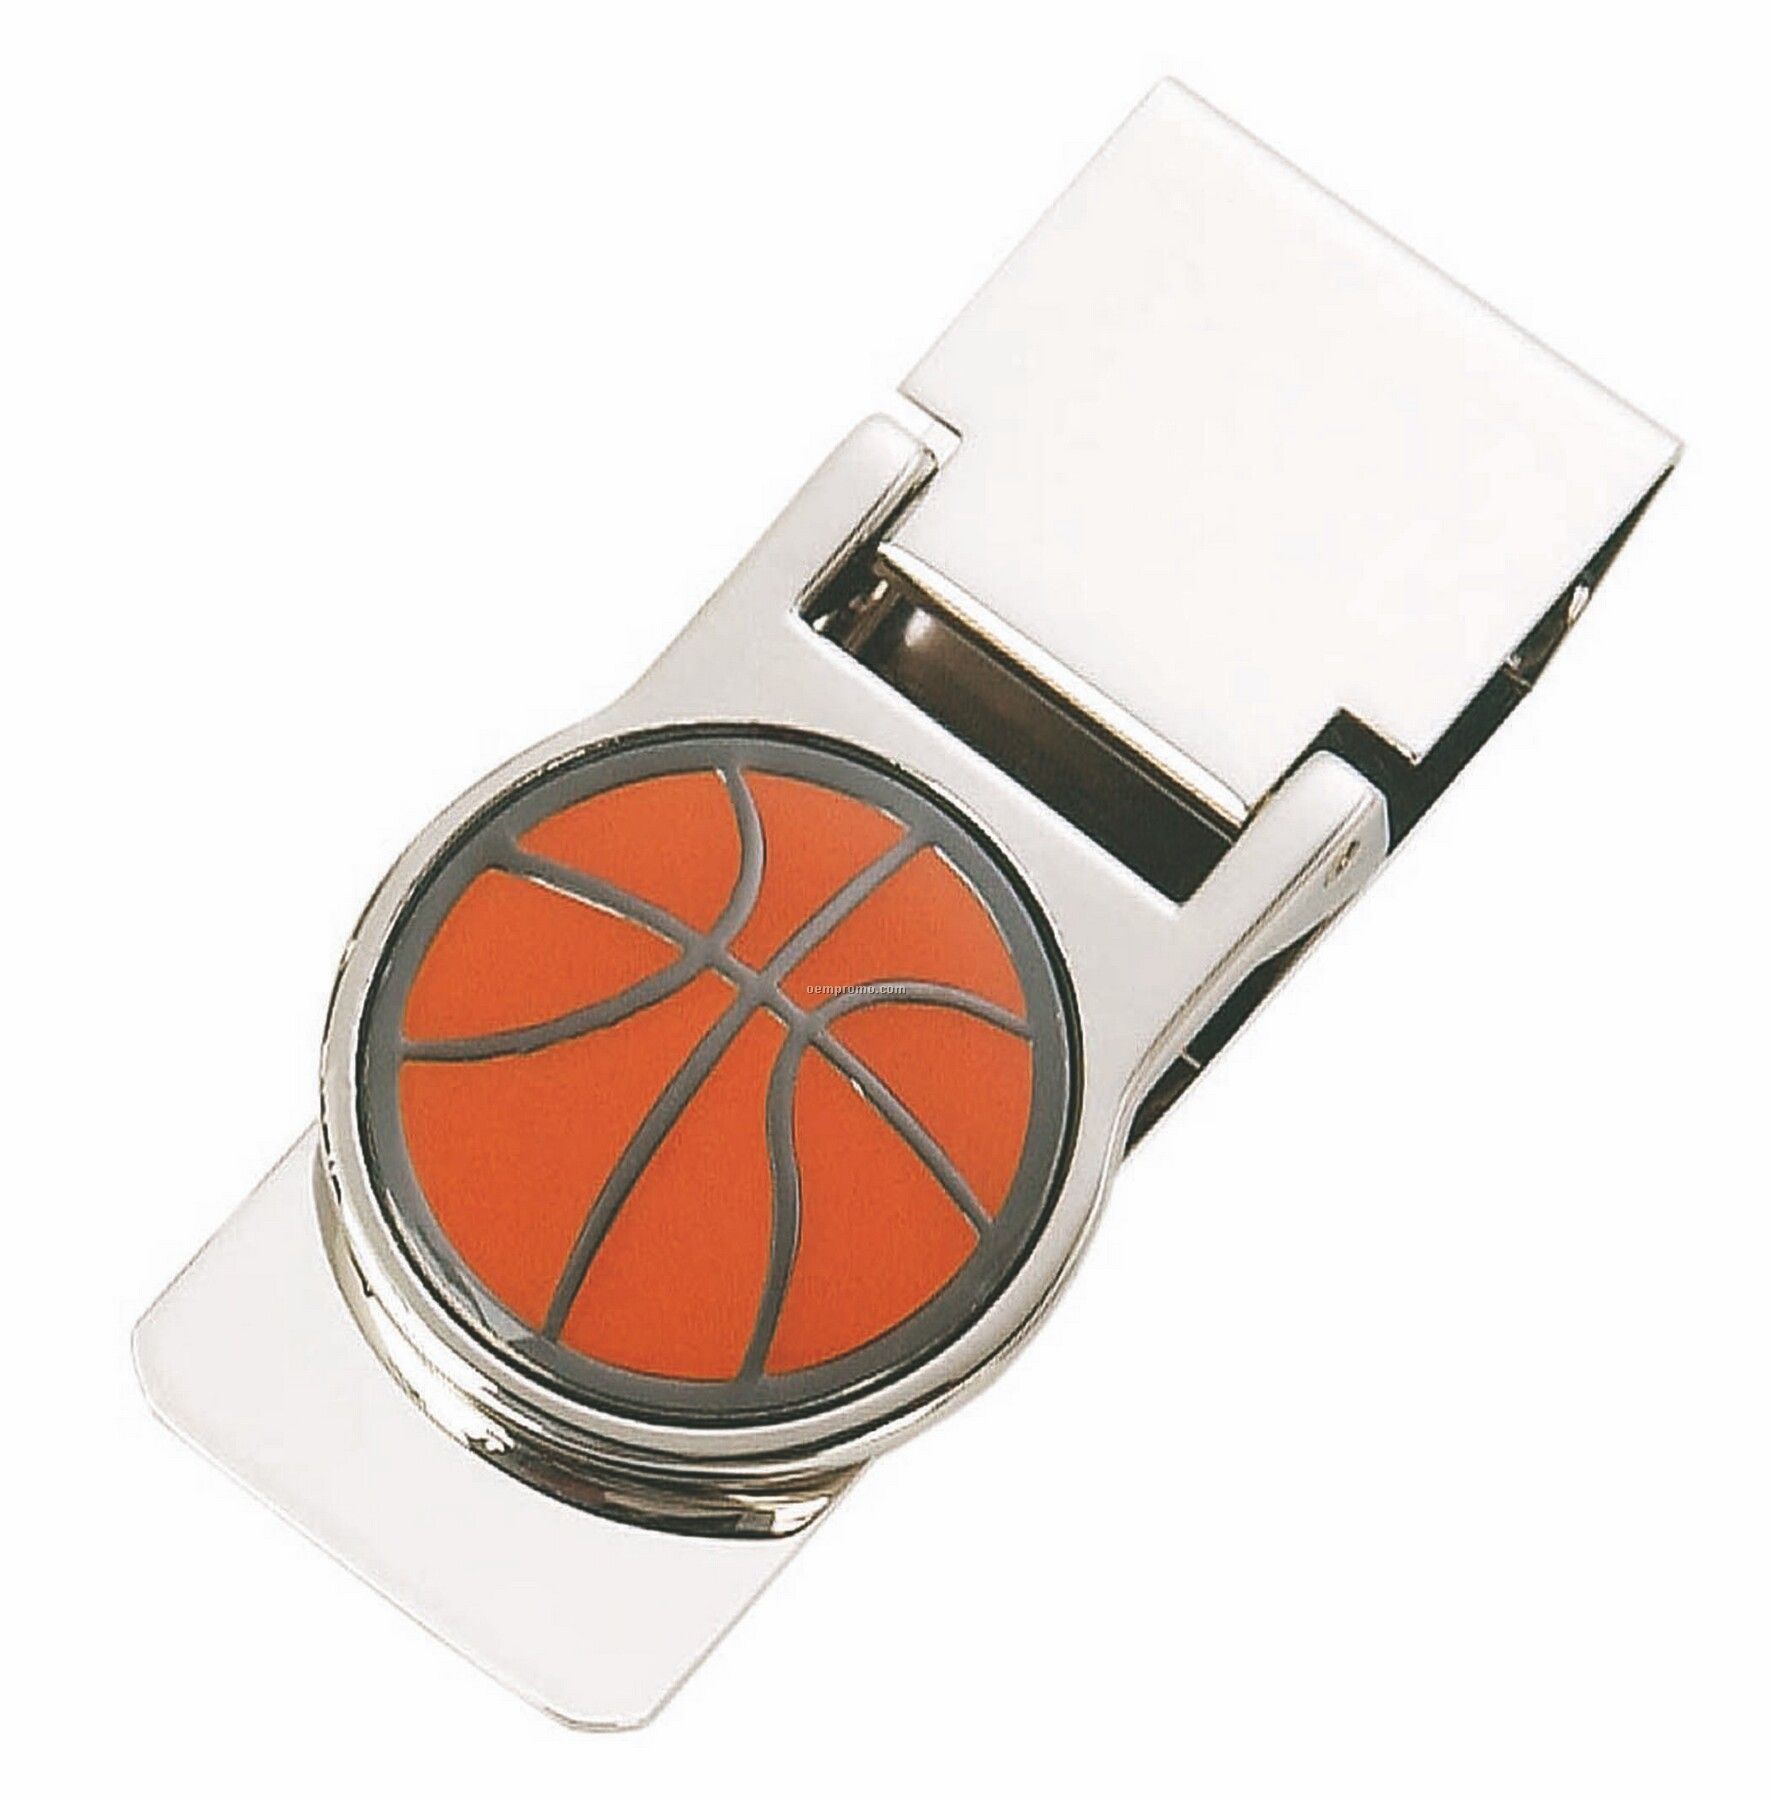 Shiny Nickel Money Clip With 3d Emblem Of Basketball Insert